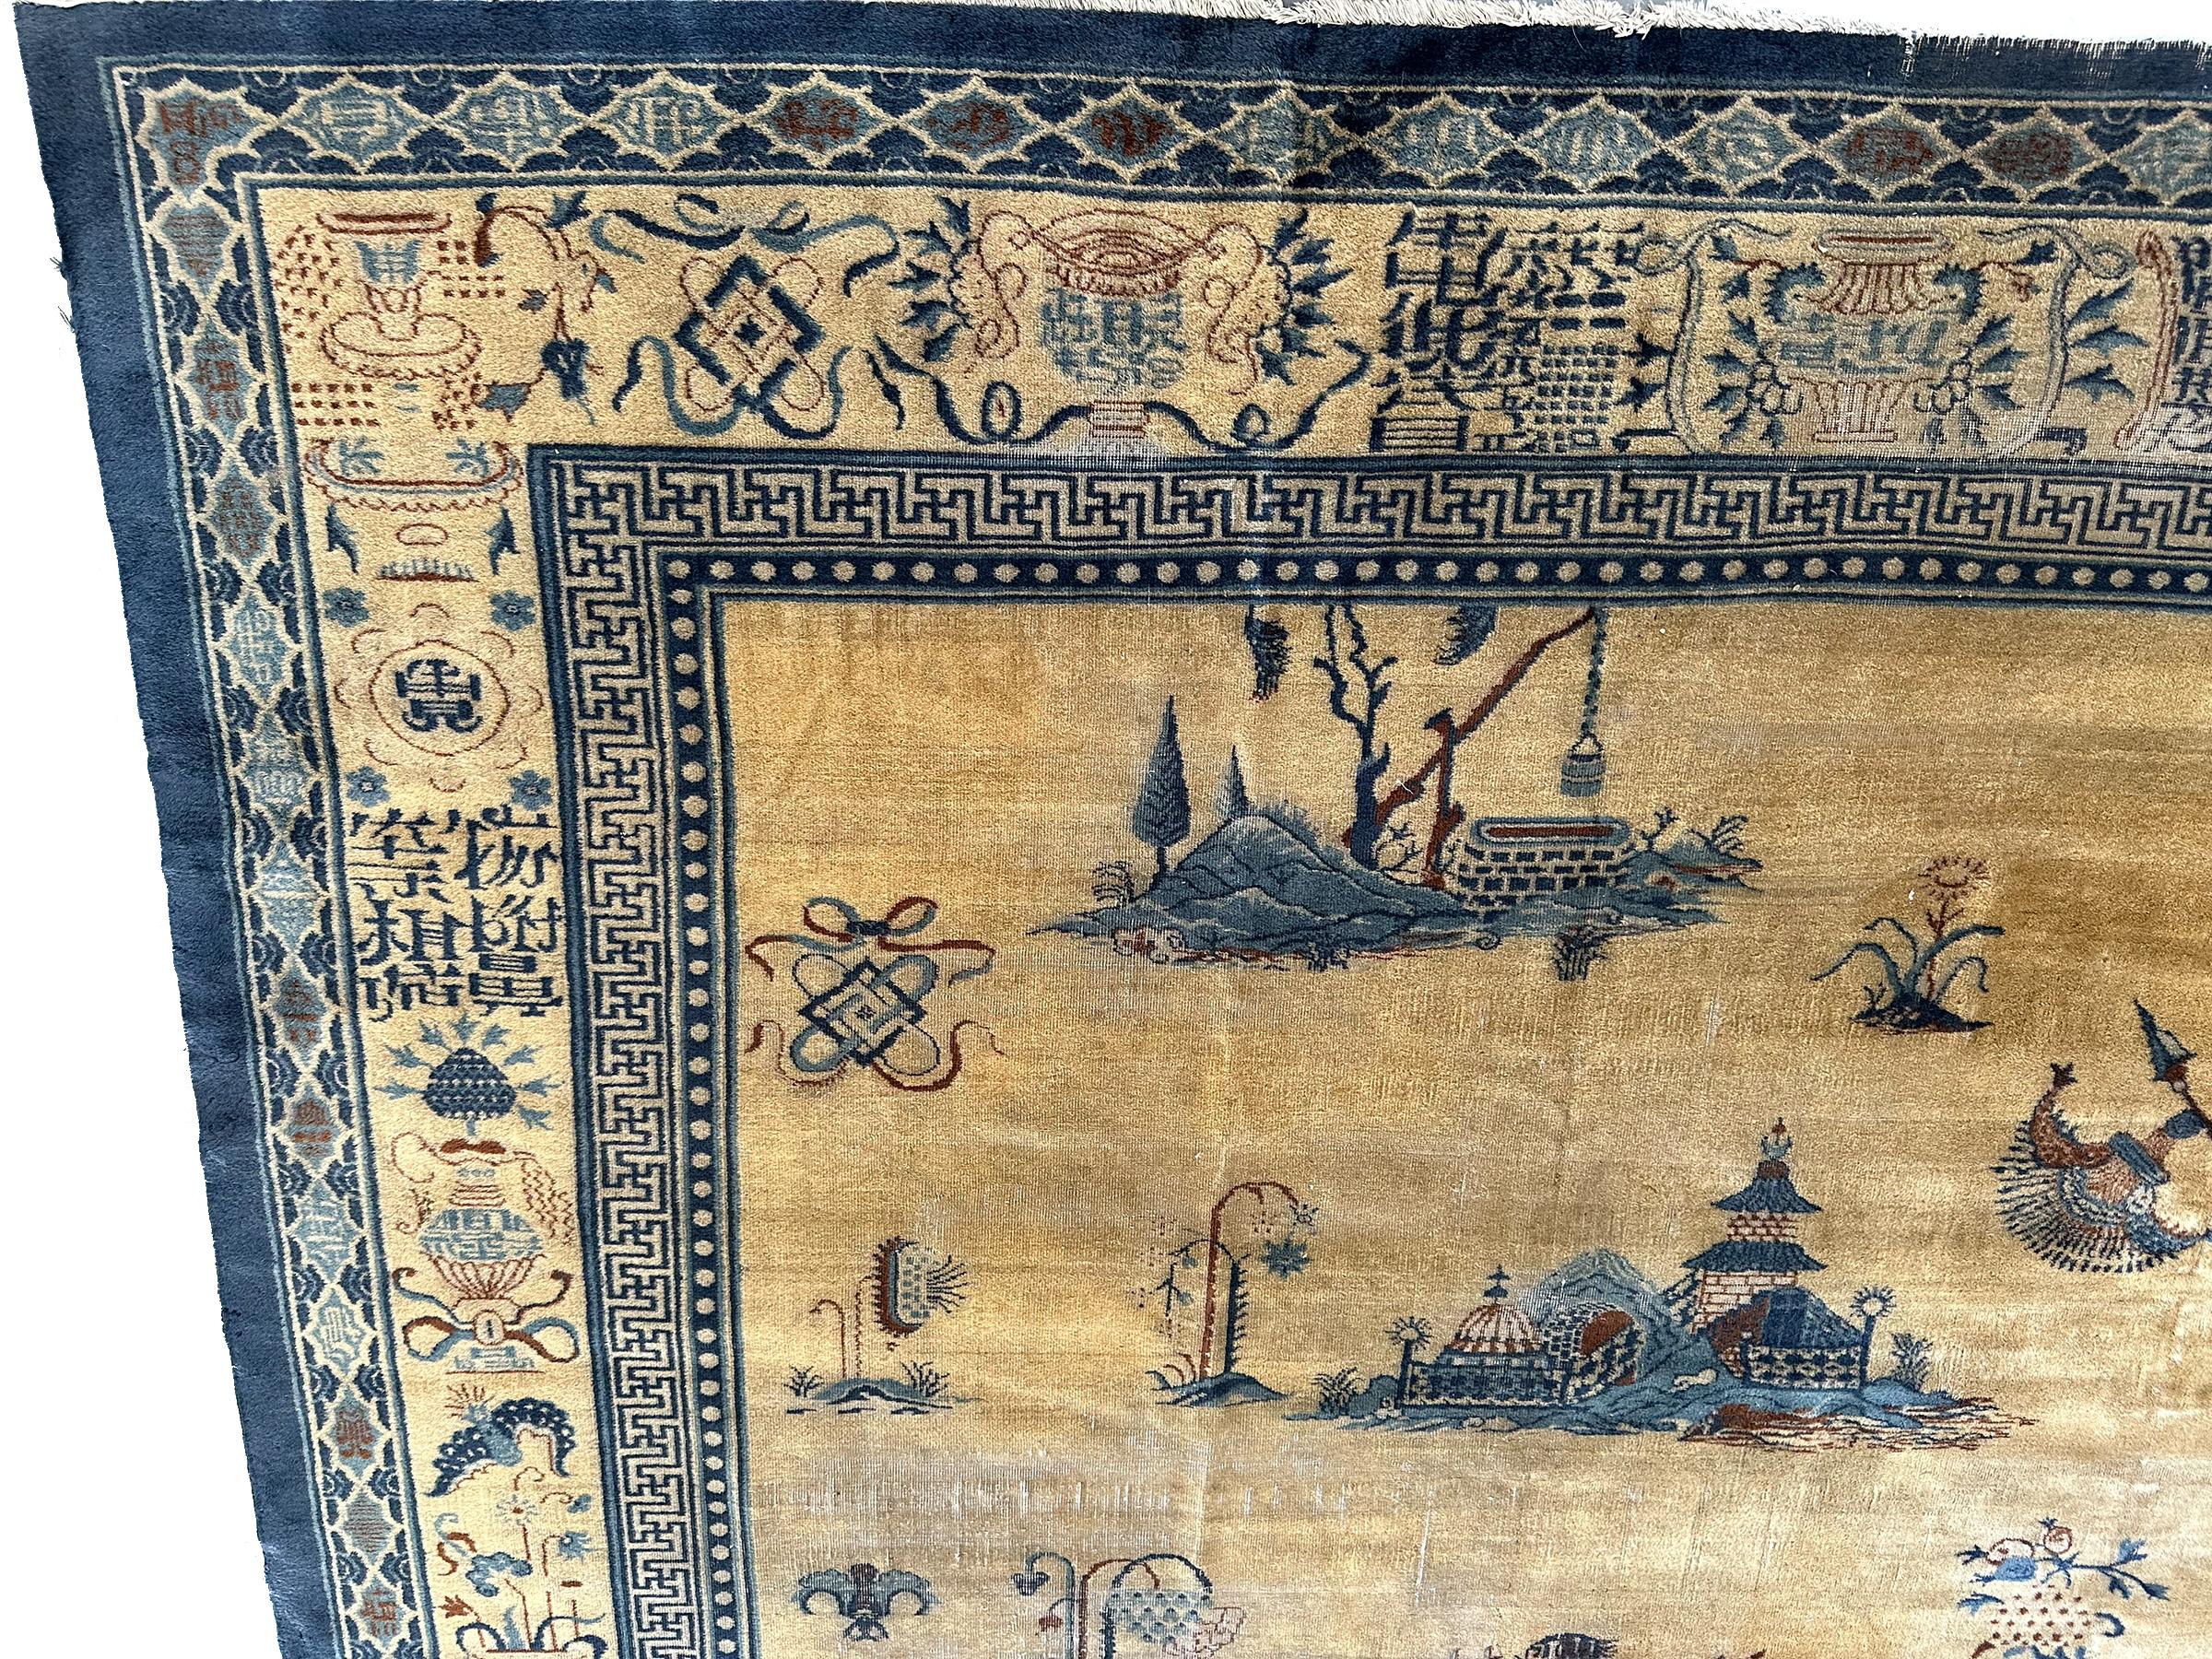 Wool Rare Antique Chinese Rug Pre-1900 Chinese Symbols 12x15 361cm x 427cm Pre-1900 For Sale